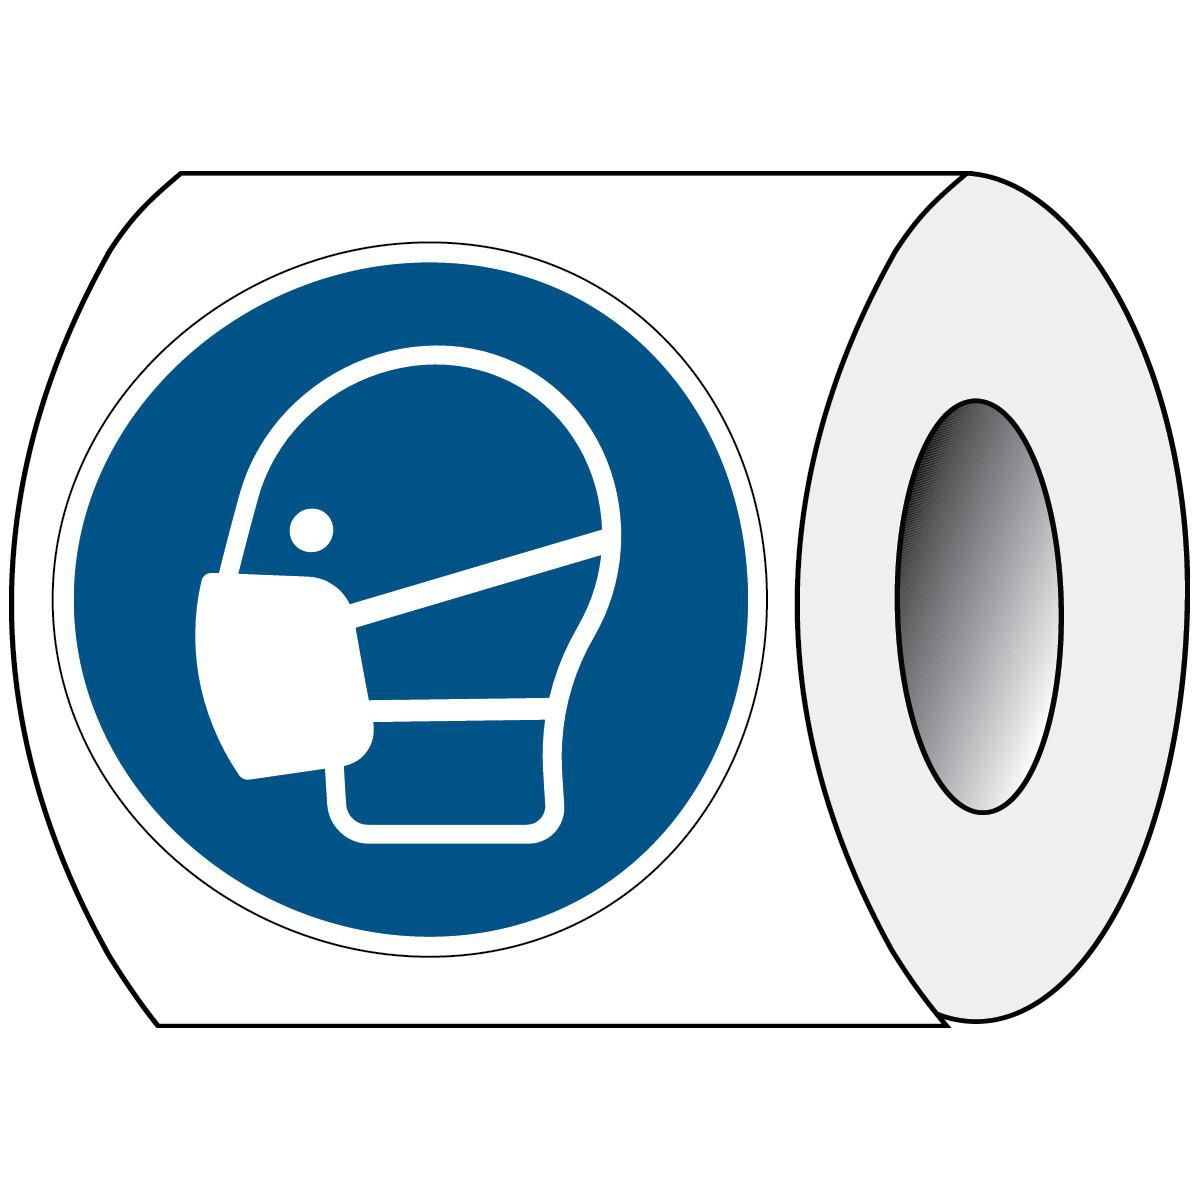 Brady PIC M016-DIA 025-PE-ROLL1 W128422512 ISO Safety Sign - Wear a mask 